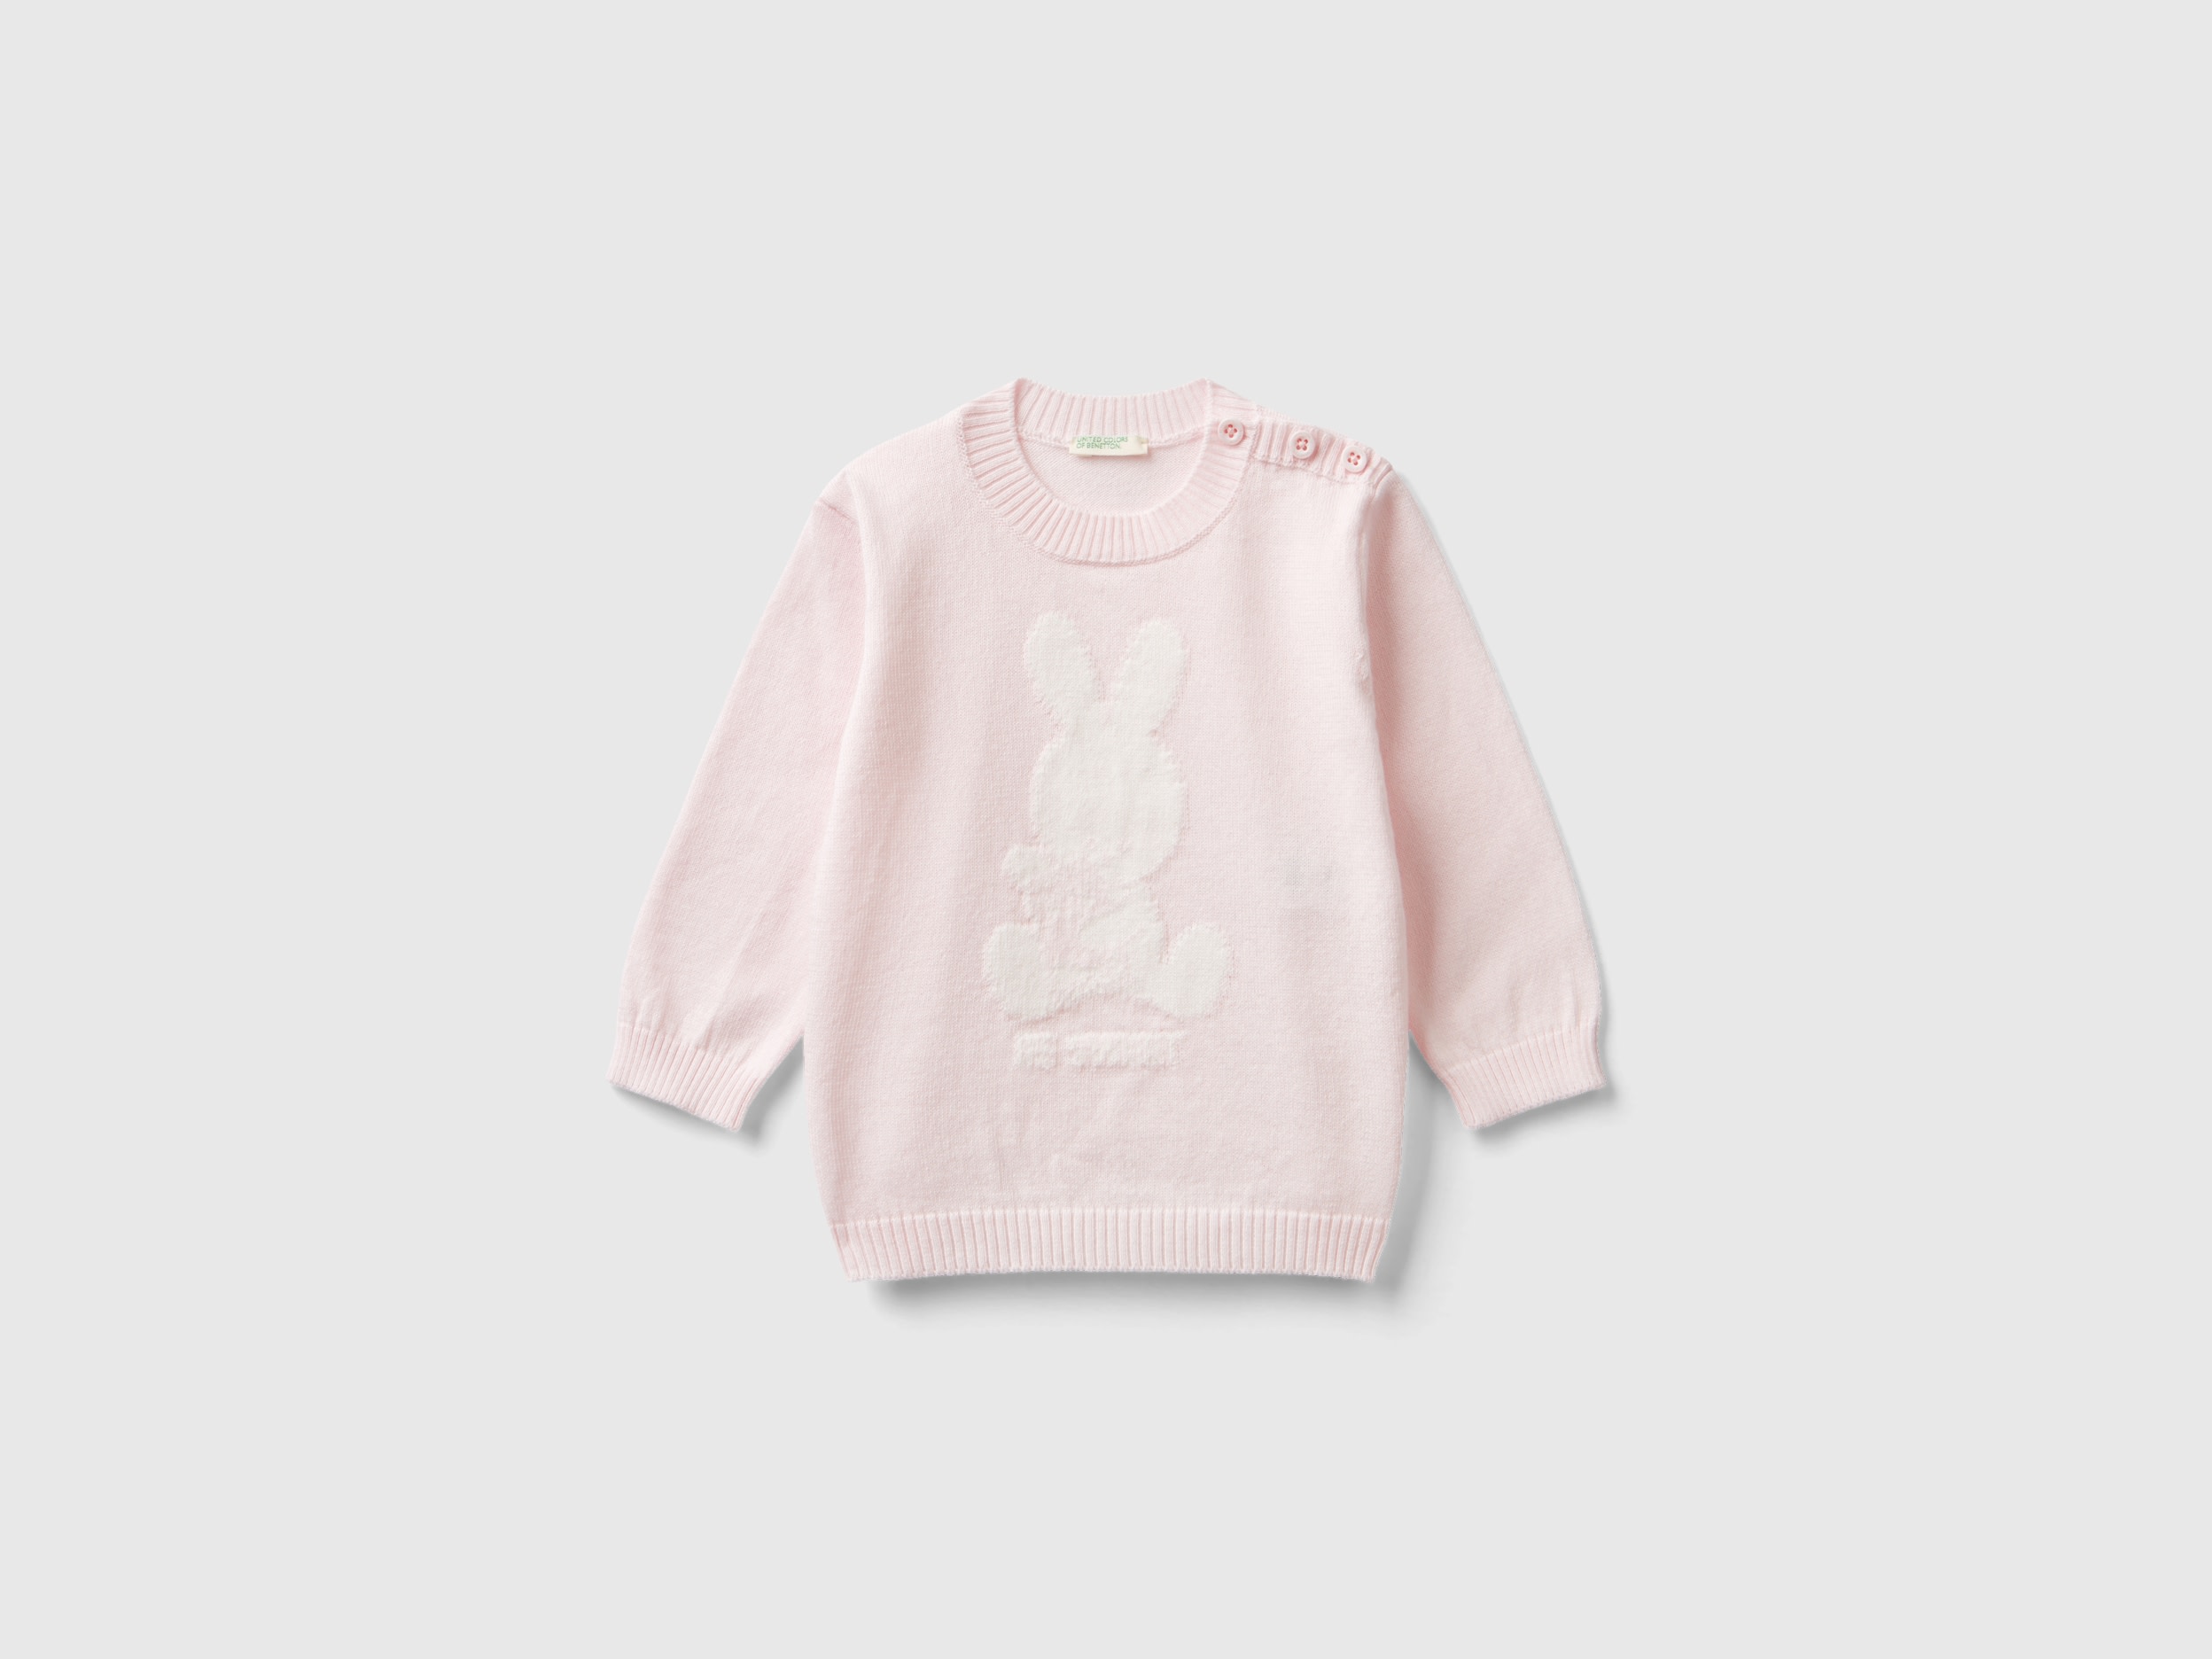 Benetton, Warm Cotton Sweater With Inlay, size 1-3, Soft Pink, Kids